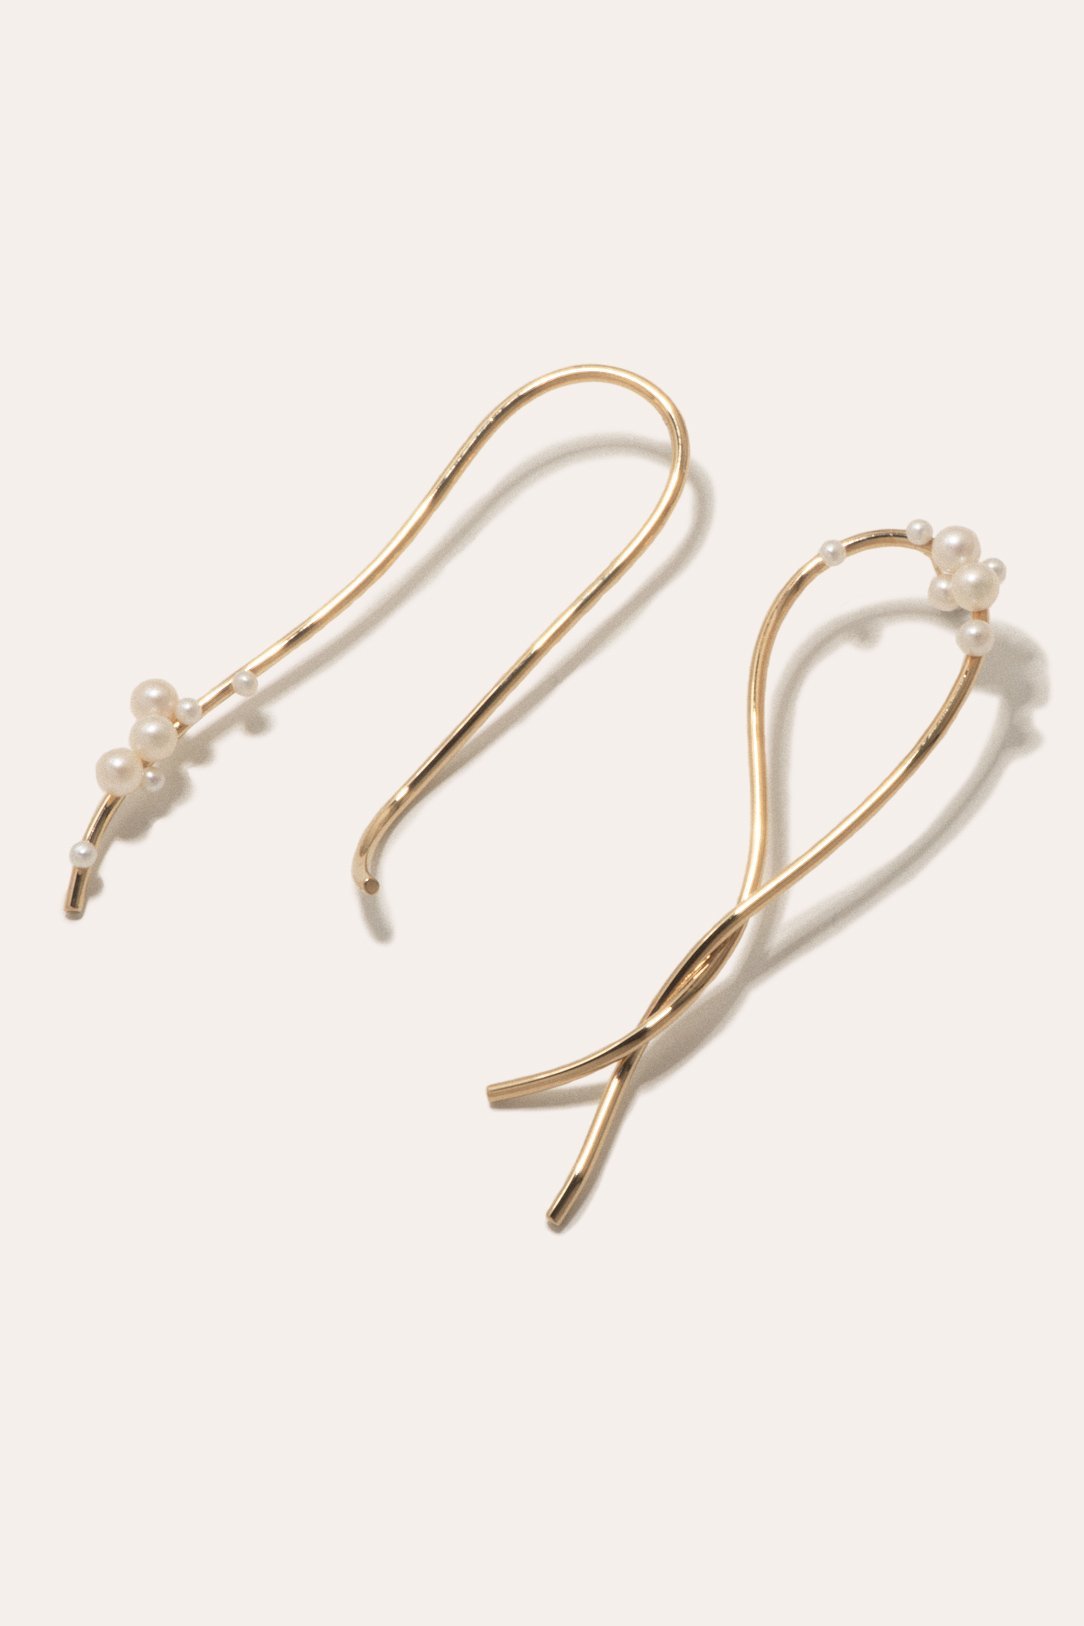 completedworks Wild Relatives Gold and Pearl Earrings